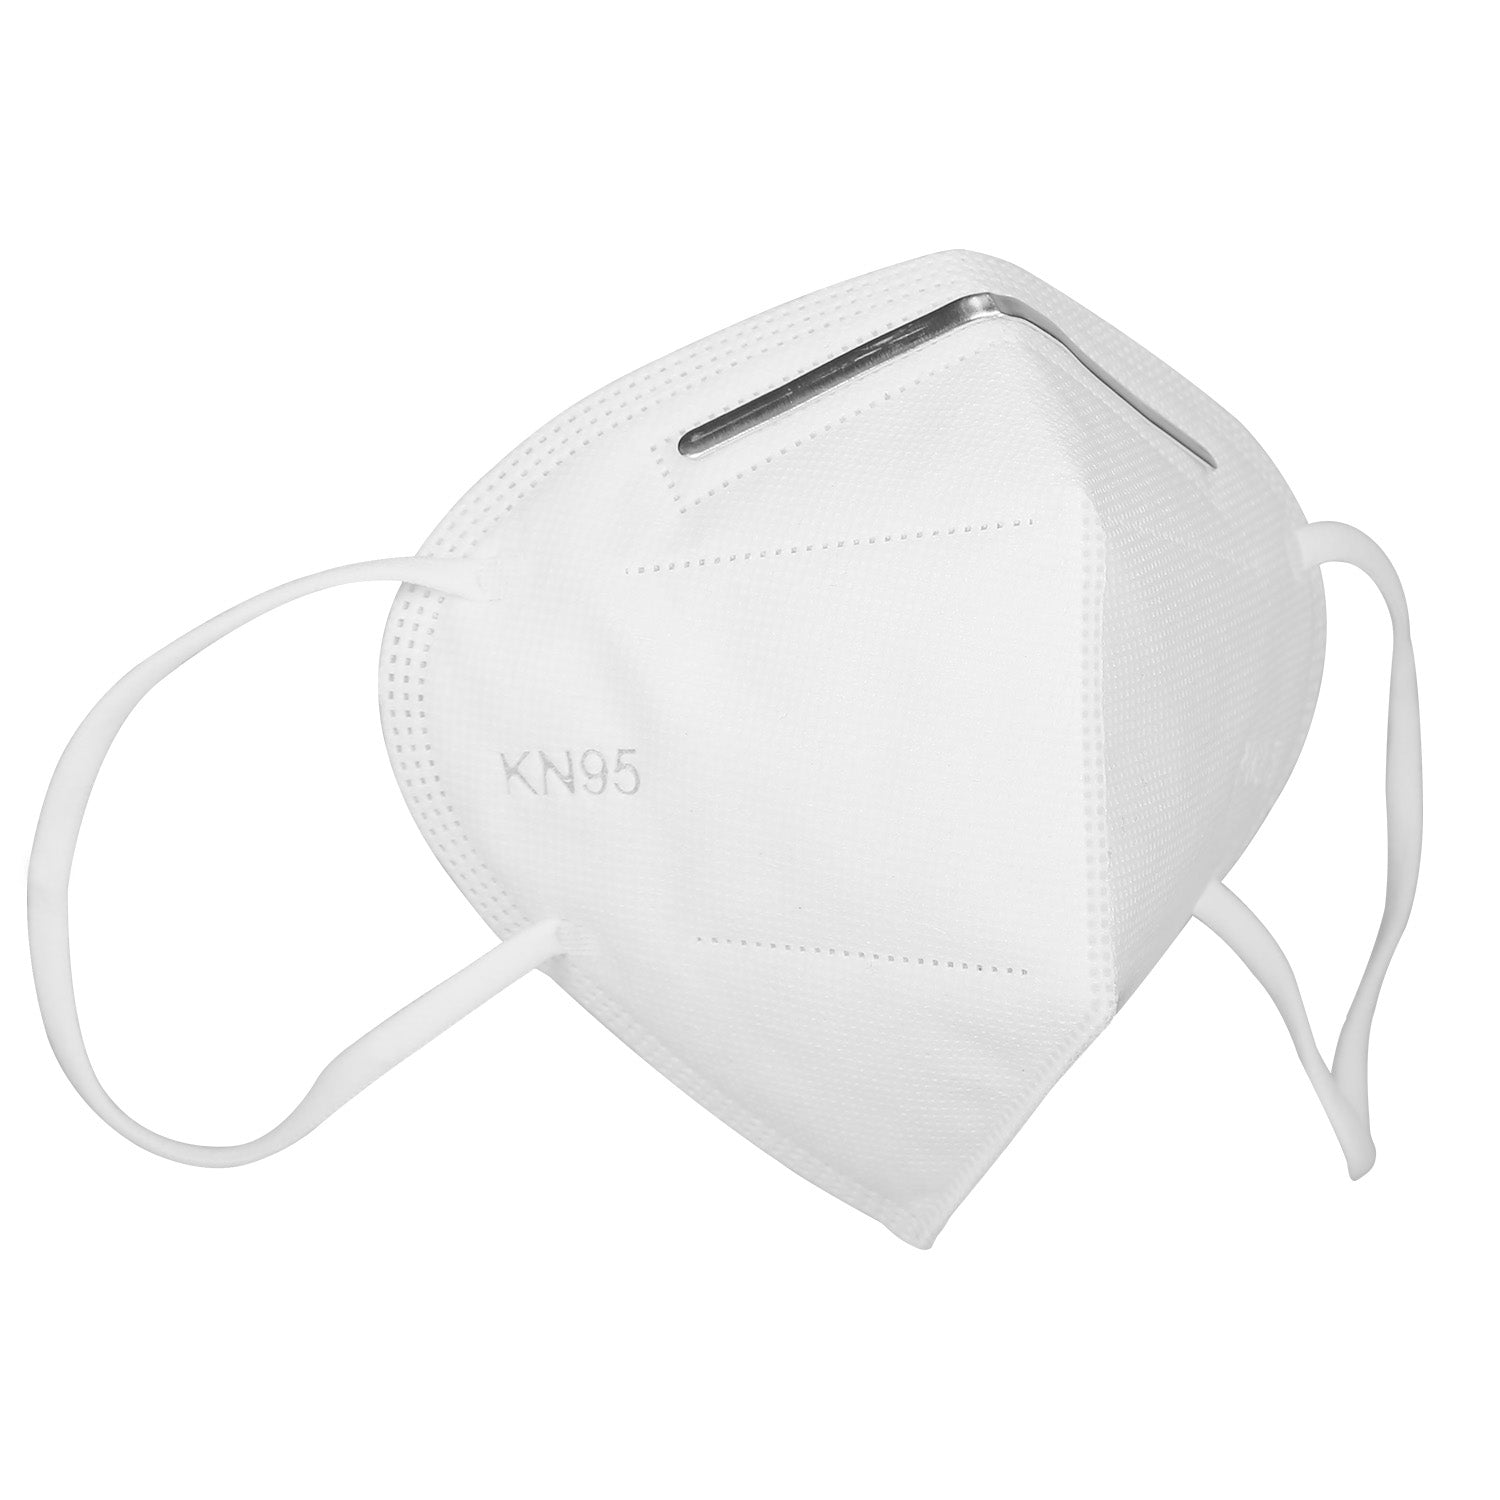 title:10 PCS Disposable KN95 Mask FFP2 Soft Breathable Protective Mask 95% Filtration Safety Masks Non-woven Fabric Face Mouth Mask;color:White